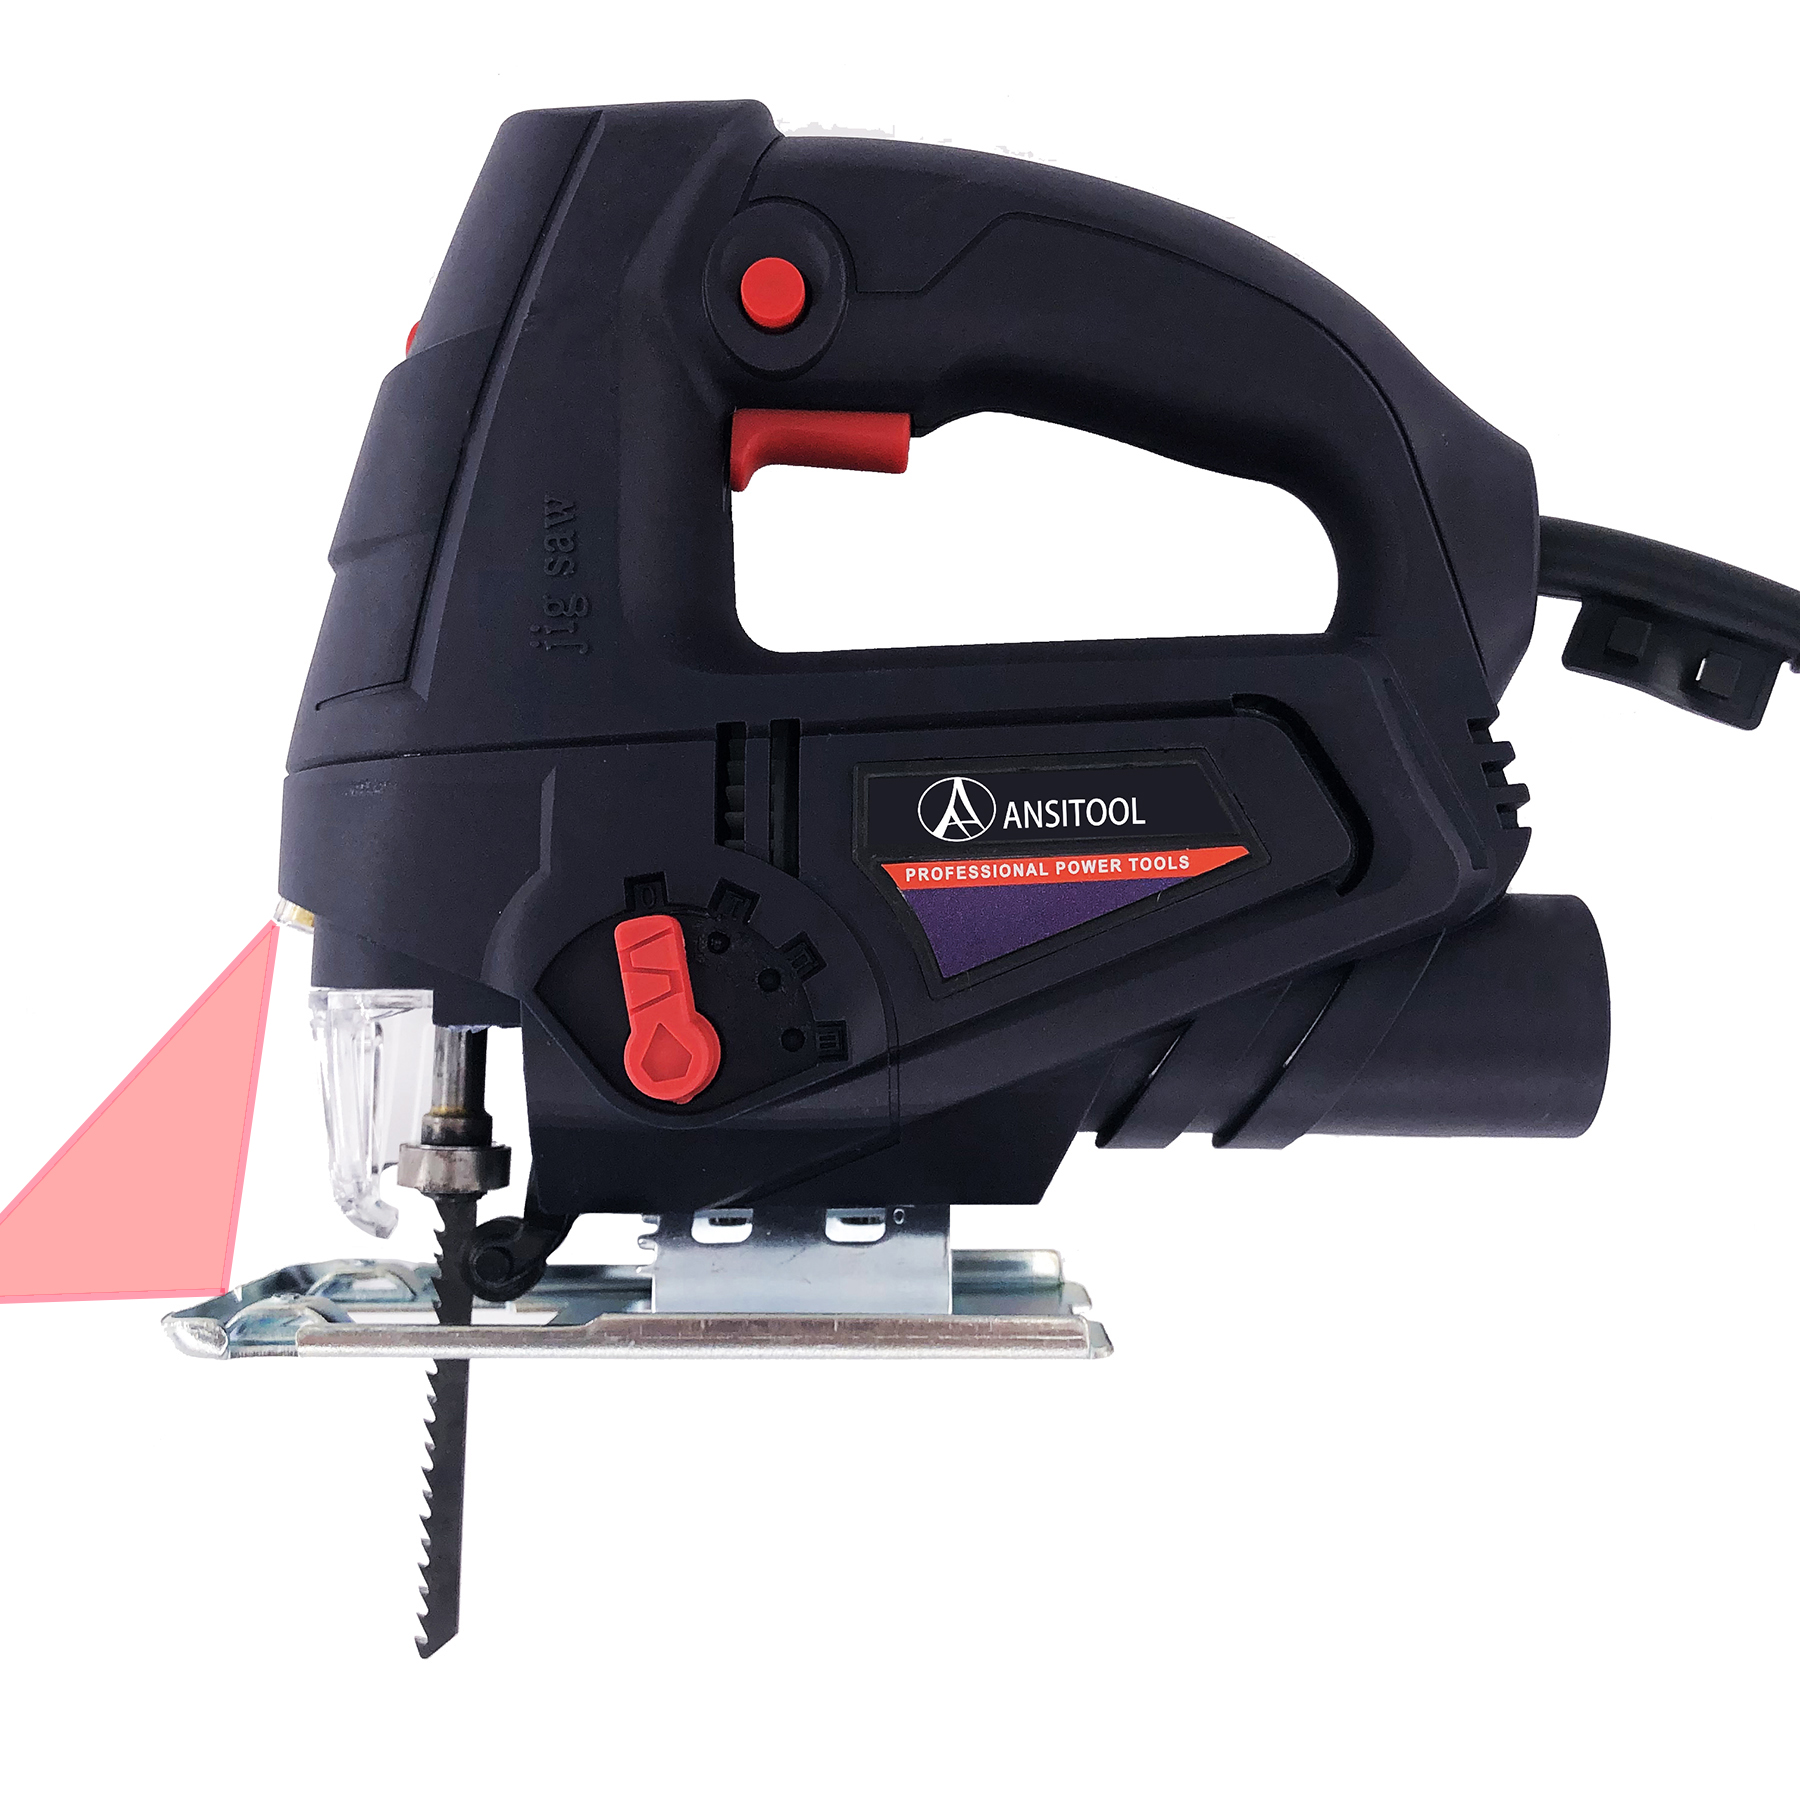 Corded Variable Speed Top-Handle electric Jig Saw machine